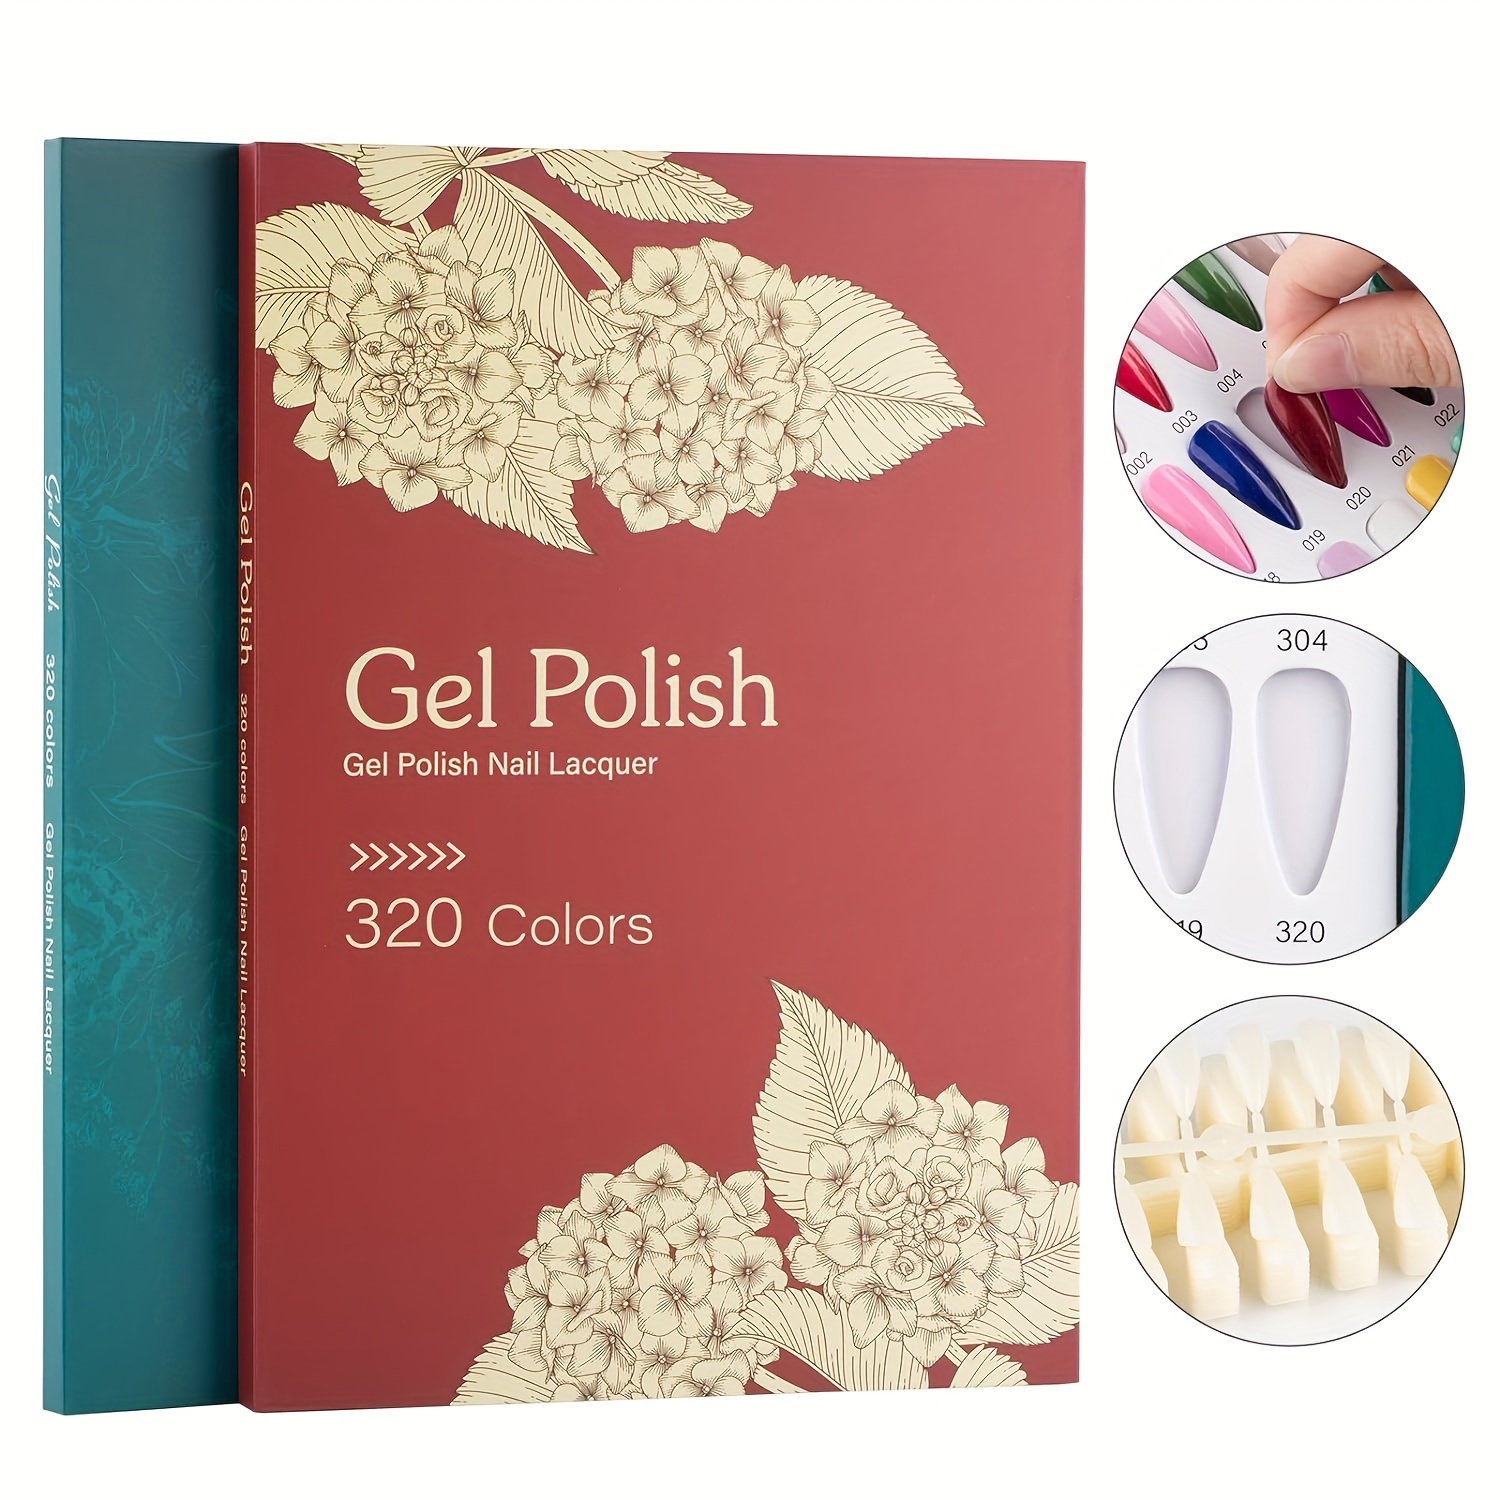 

320 Color Gel Polish Nail Lacquer Book With 480 False Nail Tips - Professional Salon Nail Color Chart Display, Unscented Gel Polish Sample Practice Board Set, No Power Or Battery Required